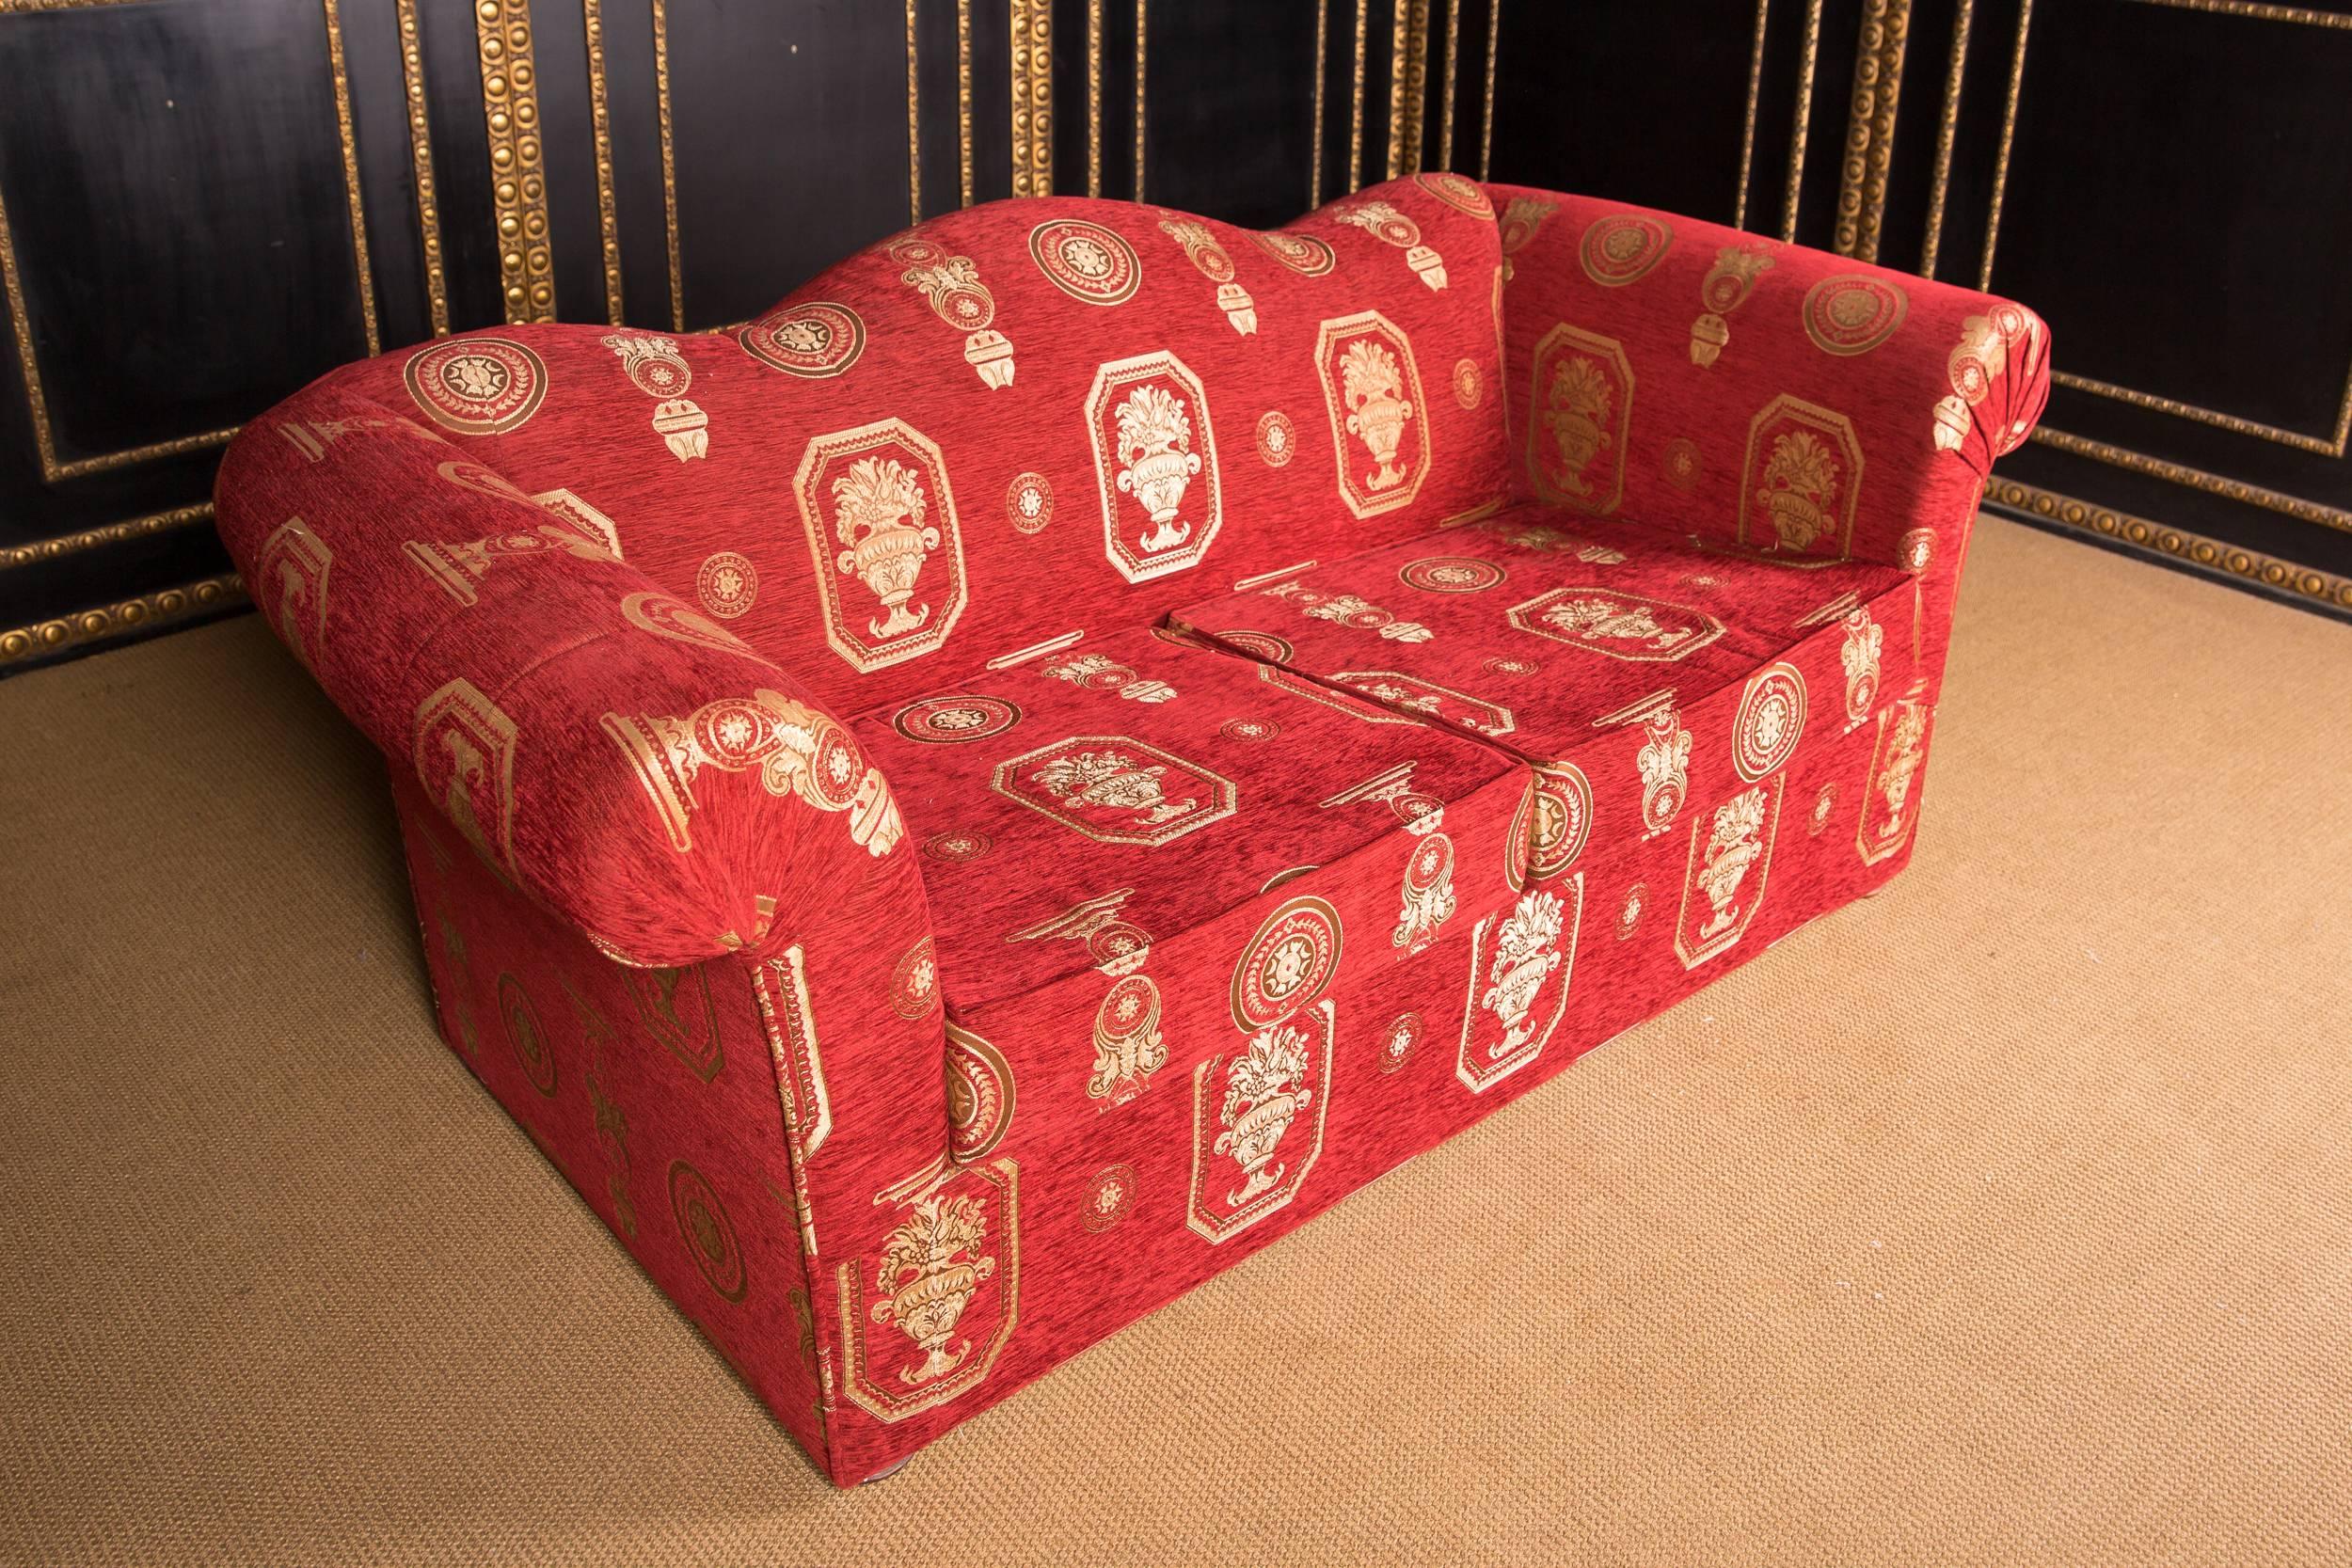 Revival High Quality Original Club Sofa Two-Seat in English Style